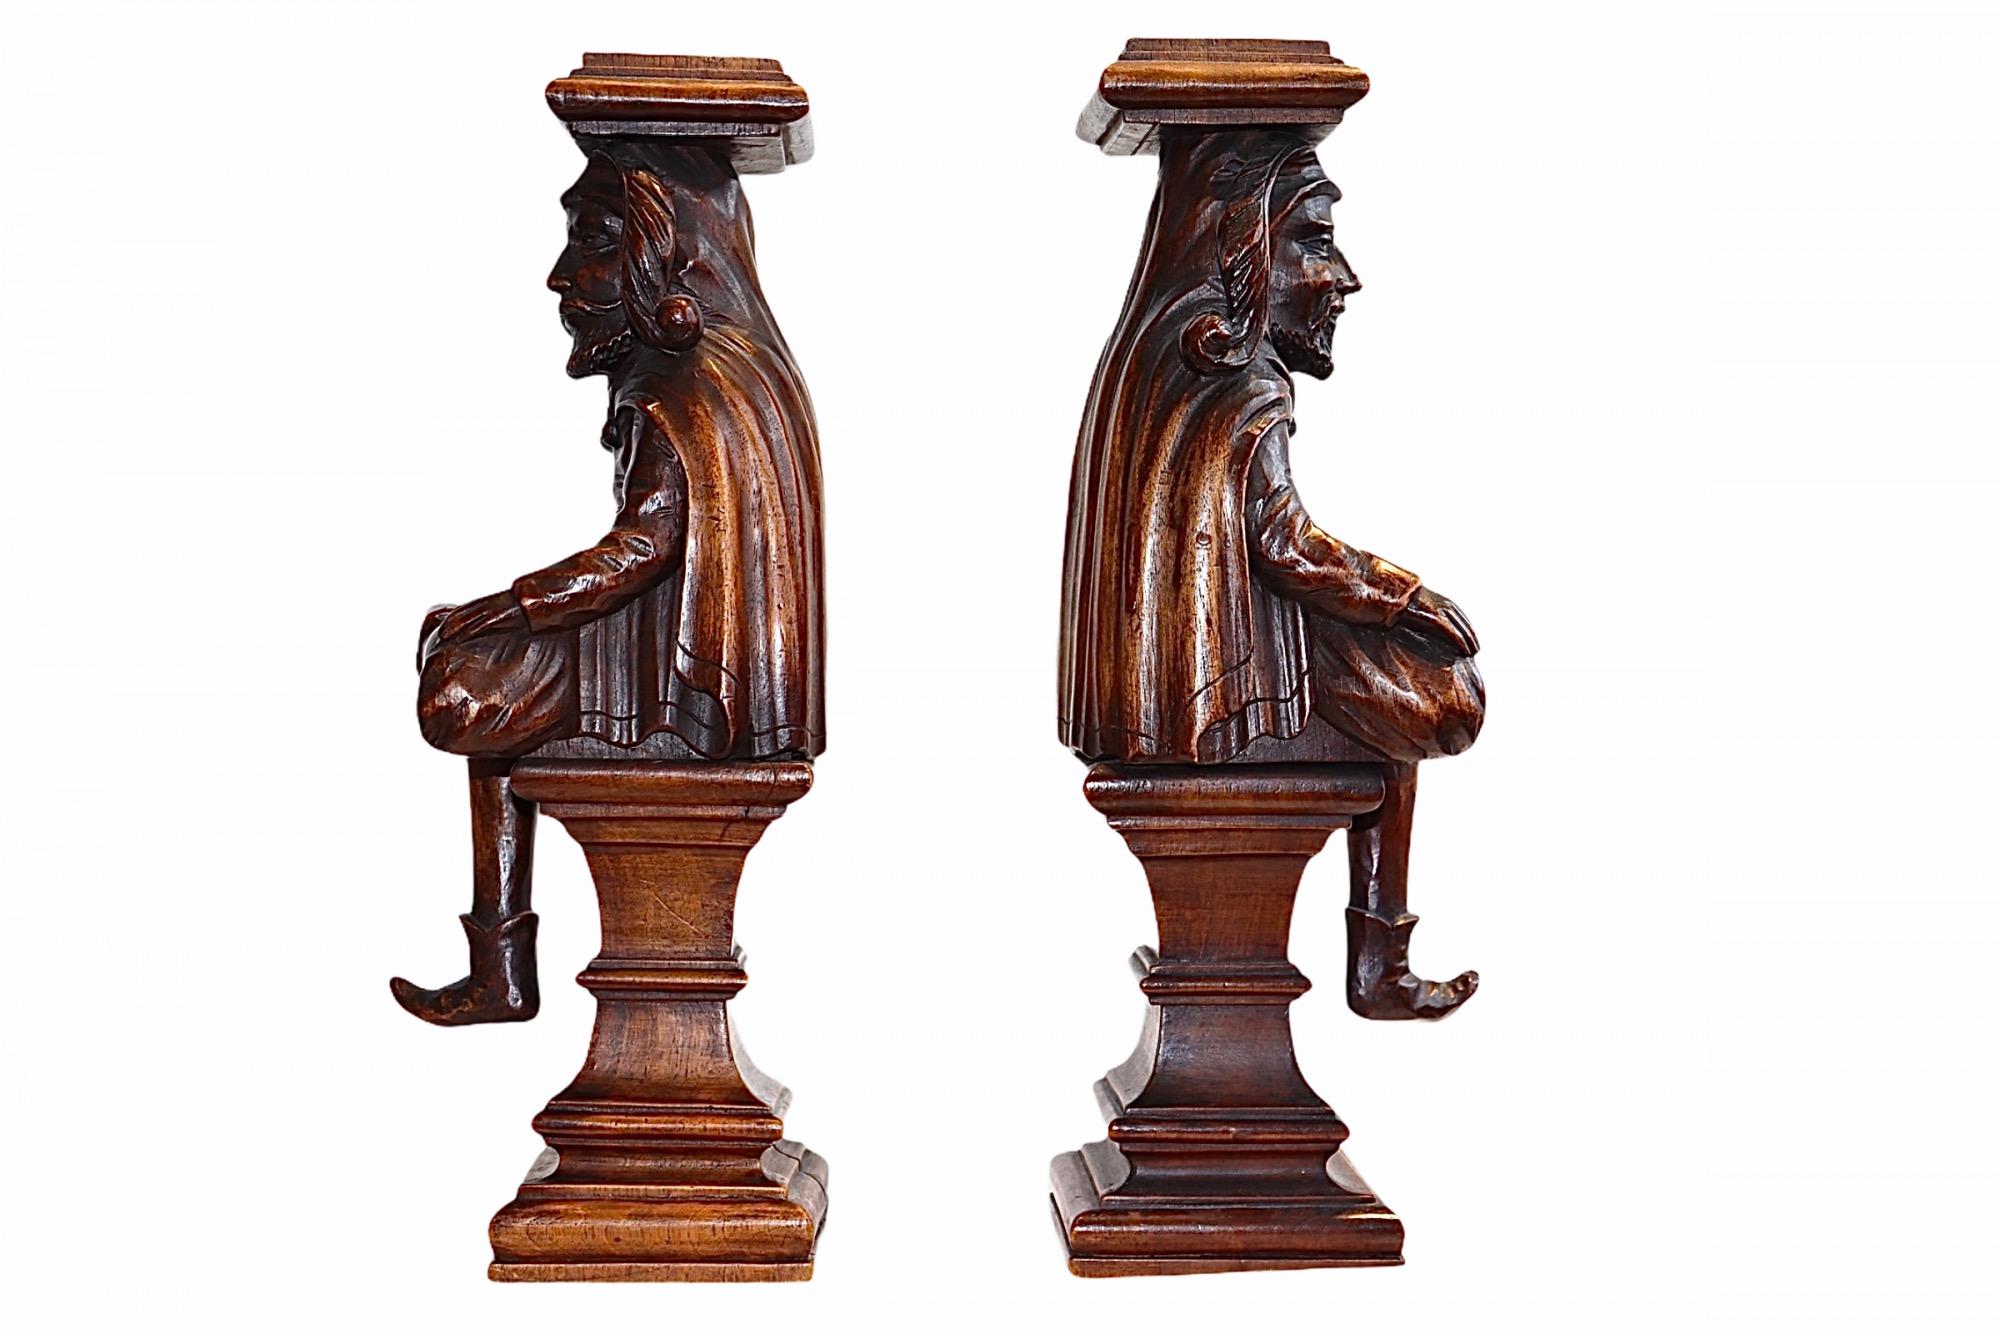 A very fine pair of 18th century carved figures, of Court Jesters These bearded gentlemen have been superbly carved in the finest detail, they original came from a piece of early 18th Century Furniture. Both the characters have finely detailed